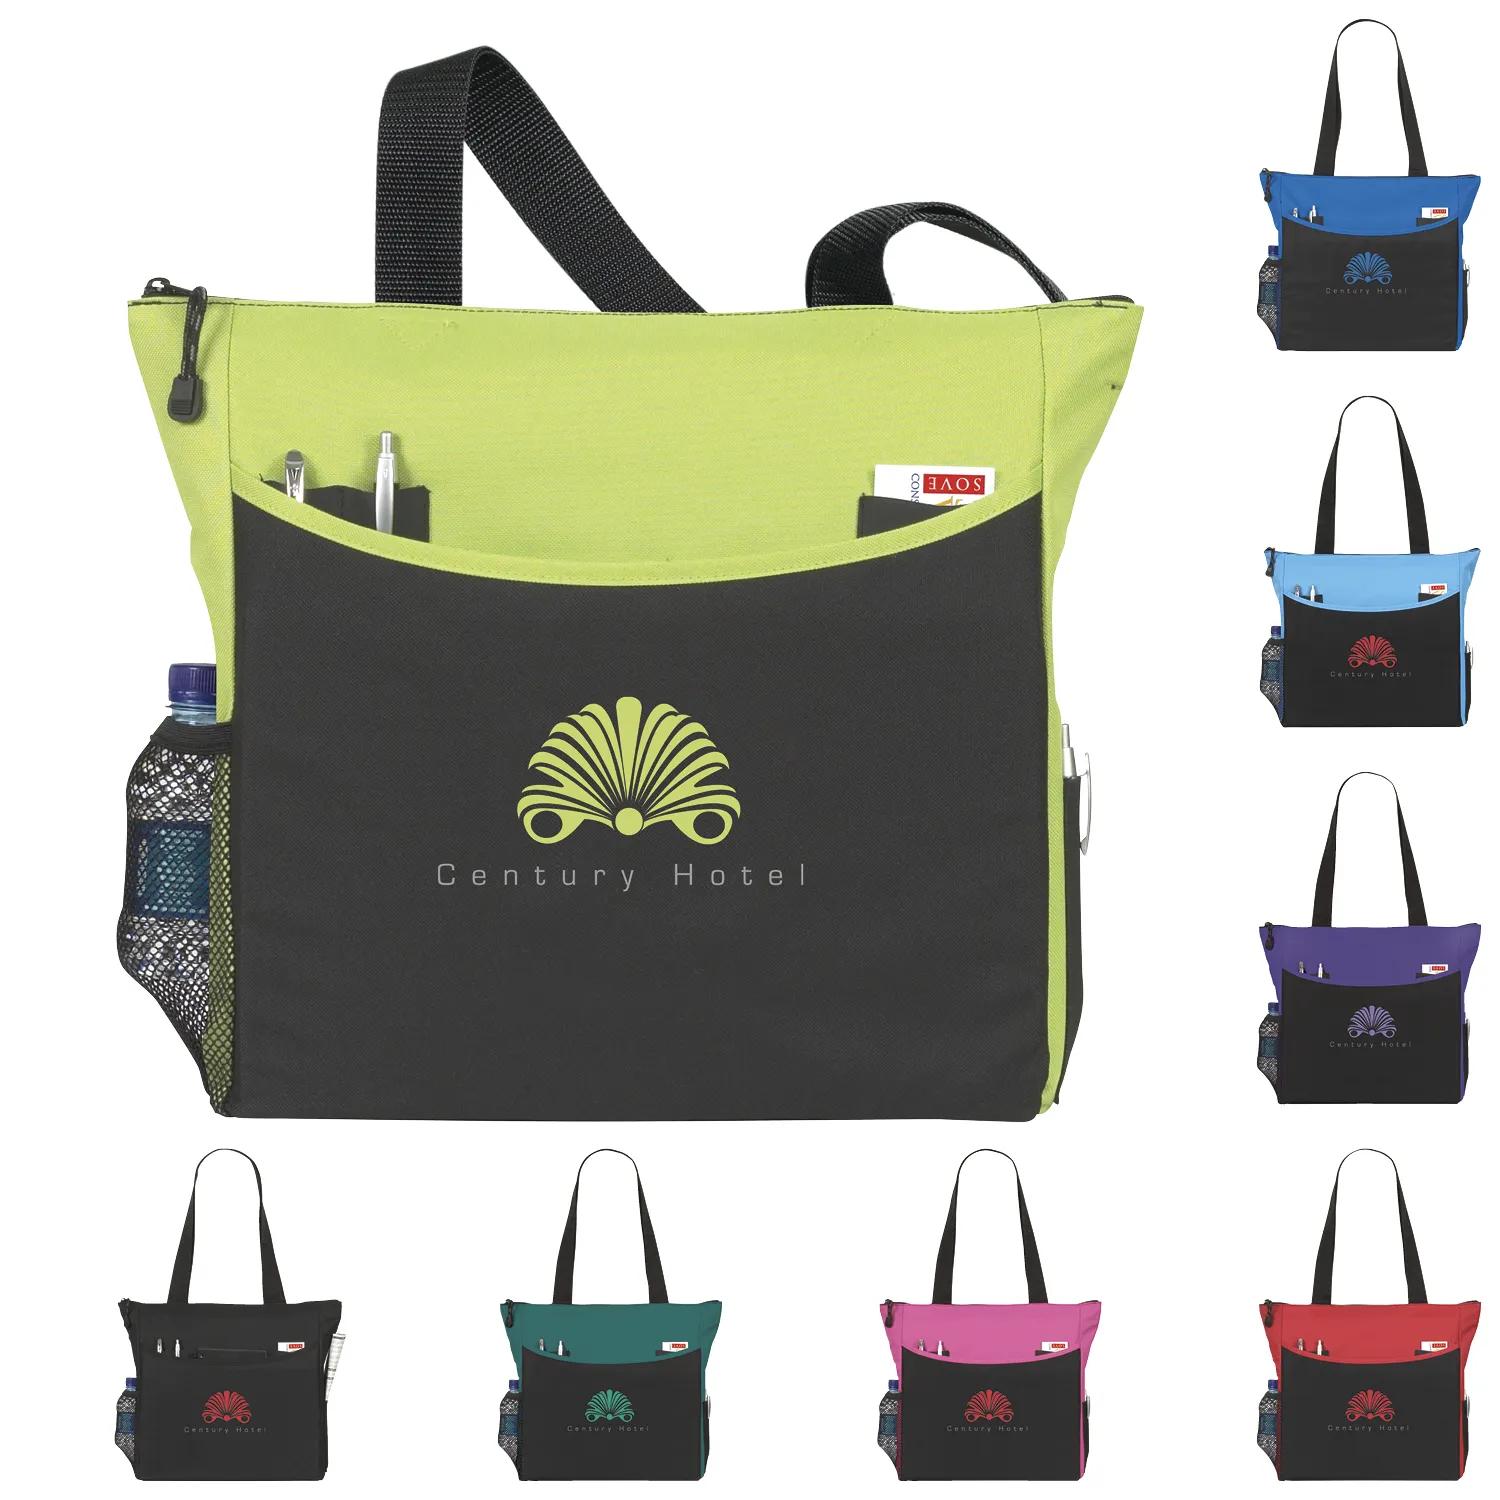 TranSport It Tote 8 of 40